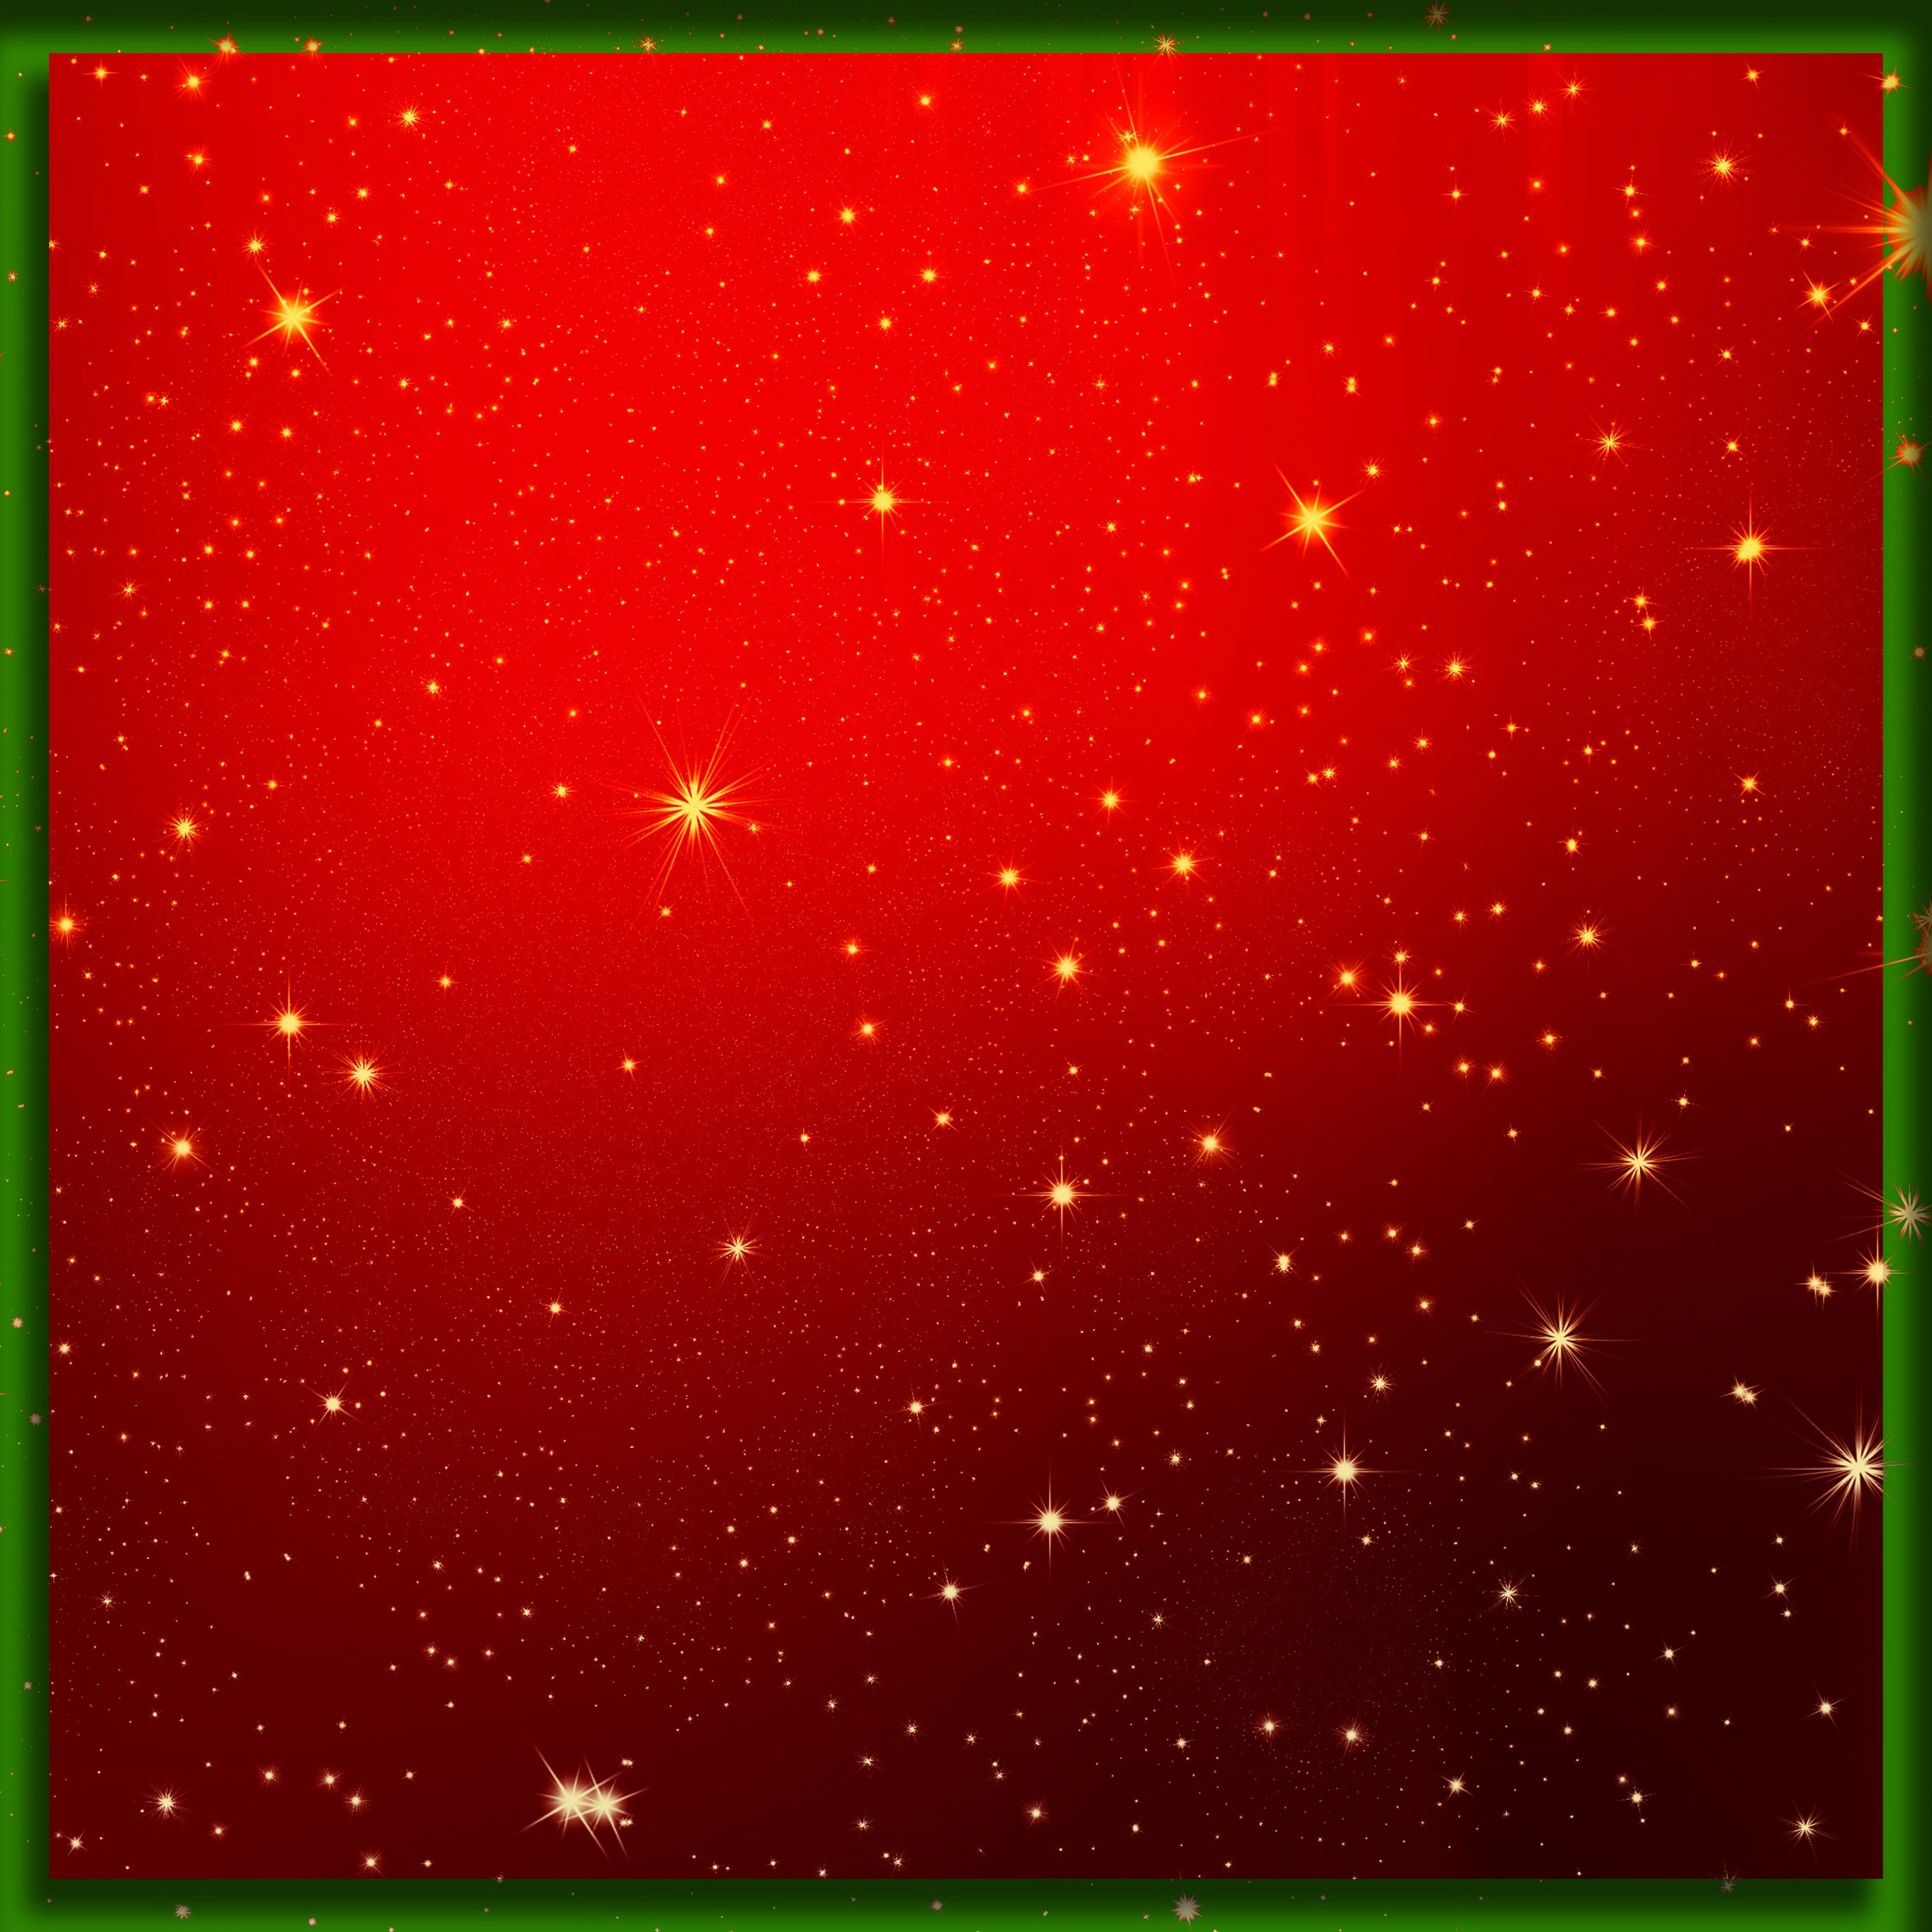 Stars At Xmas Background Image Cards Or Christmas Wallpaper